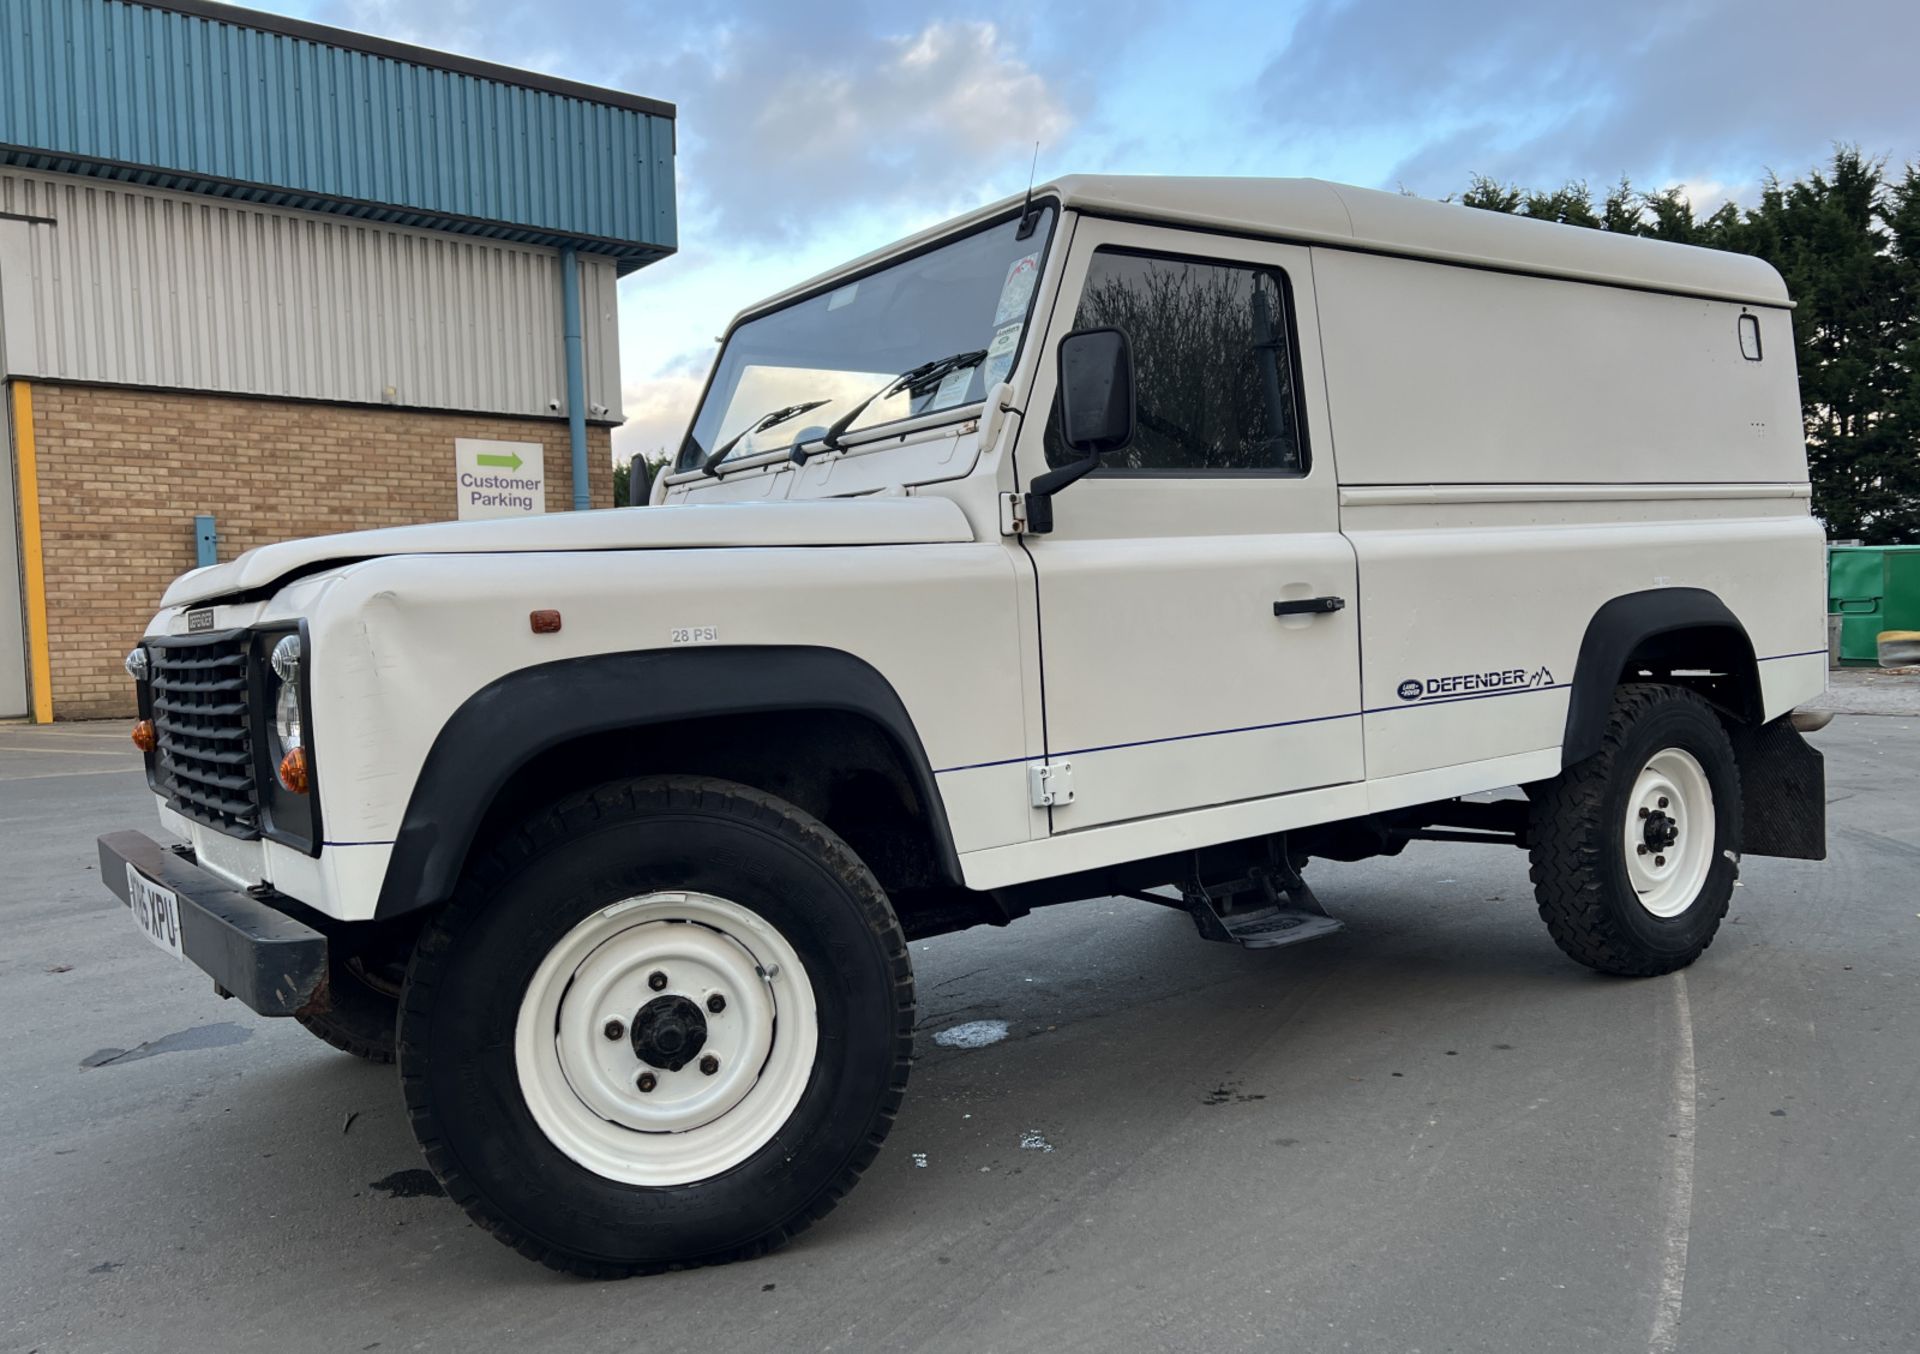 Land Rover Defender 110TDI - 1995 - Very low mileage at 24095 miles - 2.5L diesel - white - Image 3 of 49